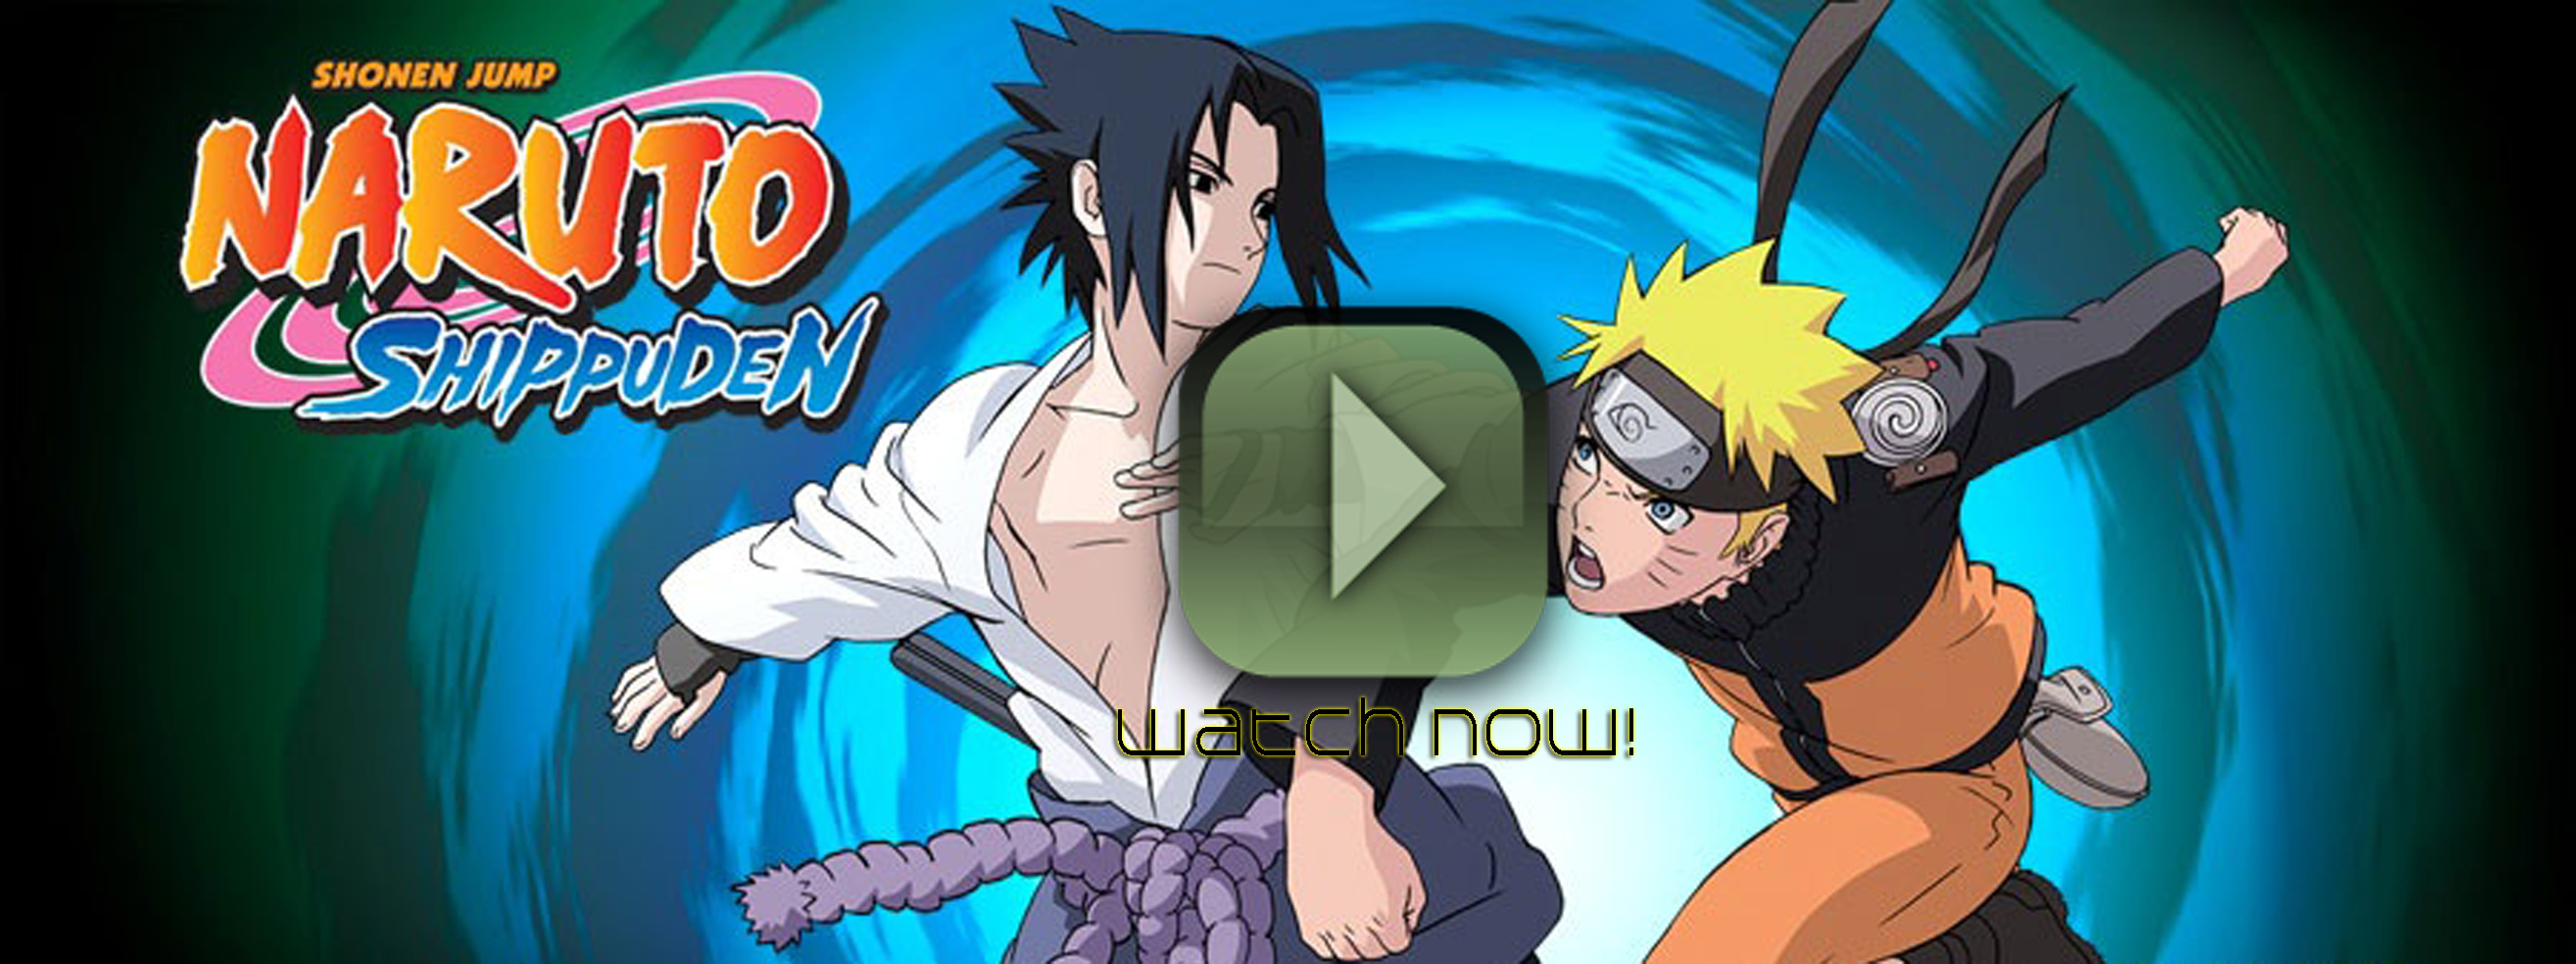 naruto shippuden english dubbed watch online free anime planet